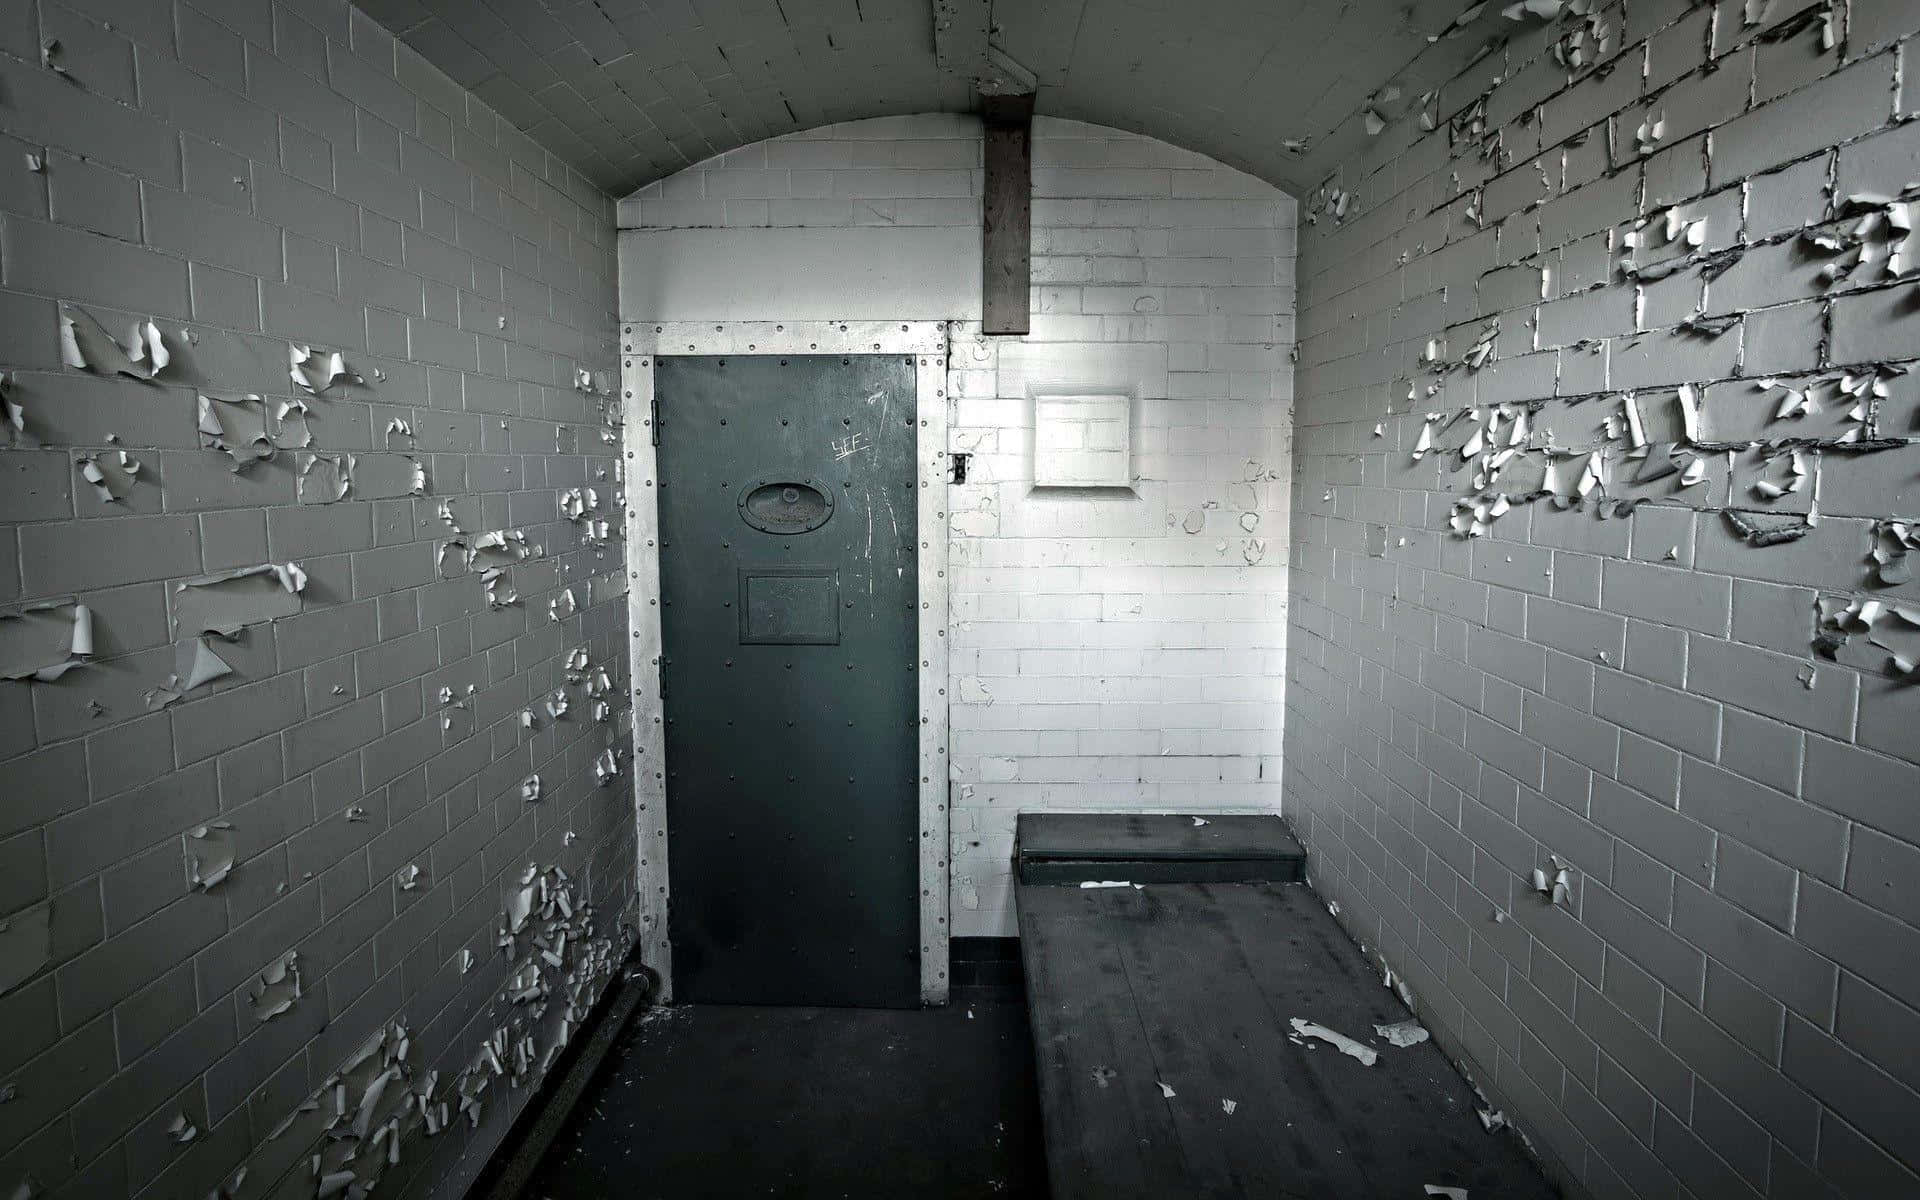 Solitary Confinement in a Prison